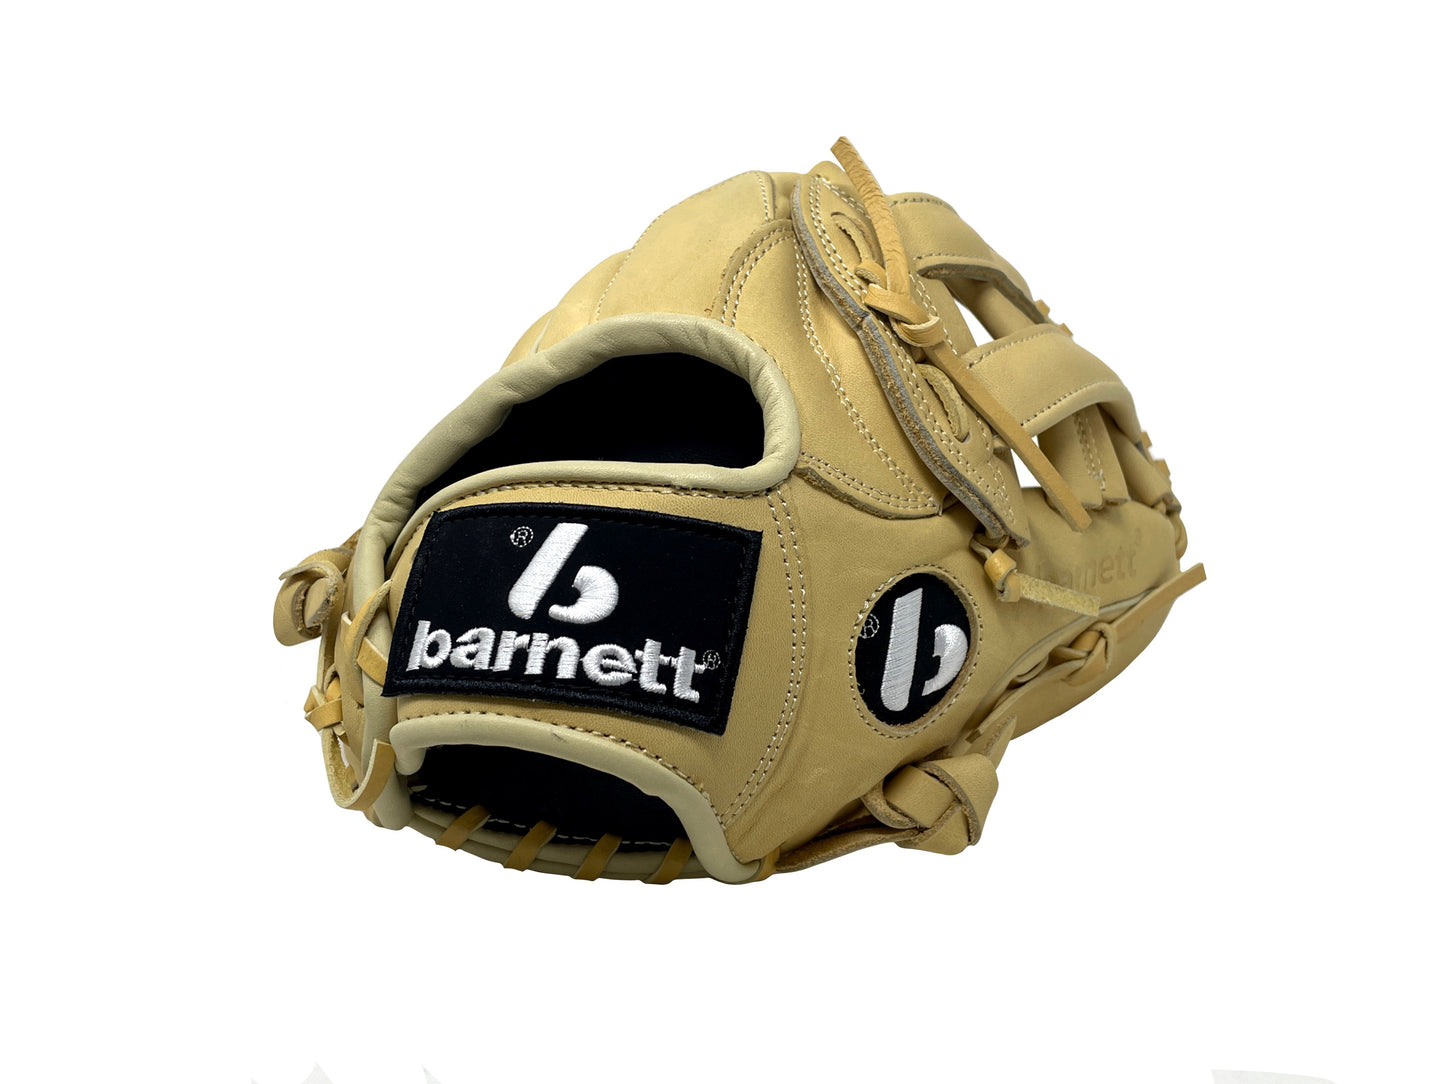 FL-117 high quality baseball and softball glove, leather, infield / fastpitch 11.7, Beige